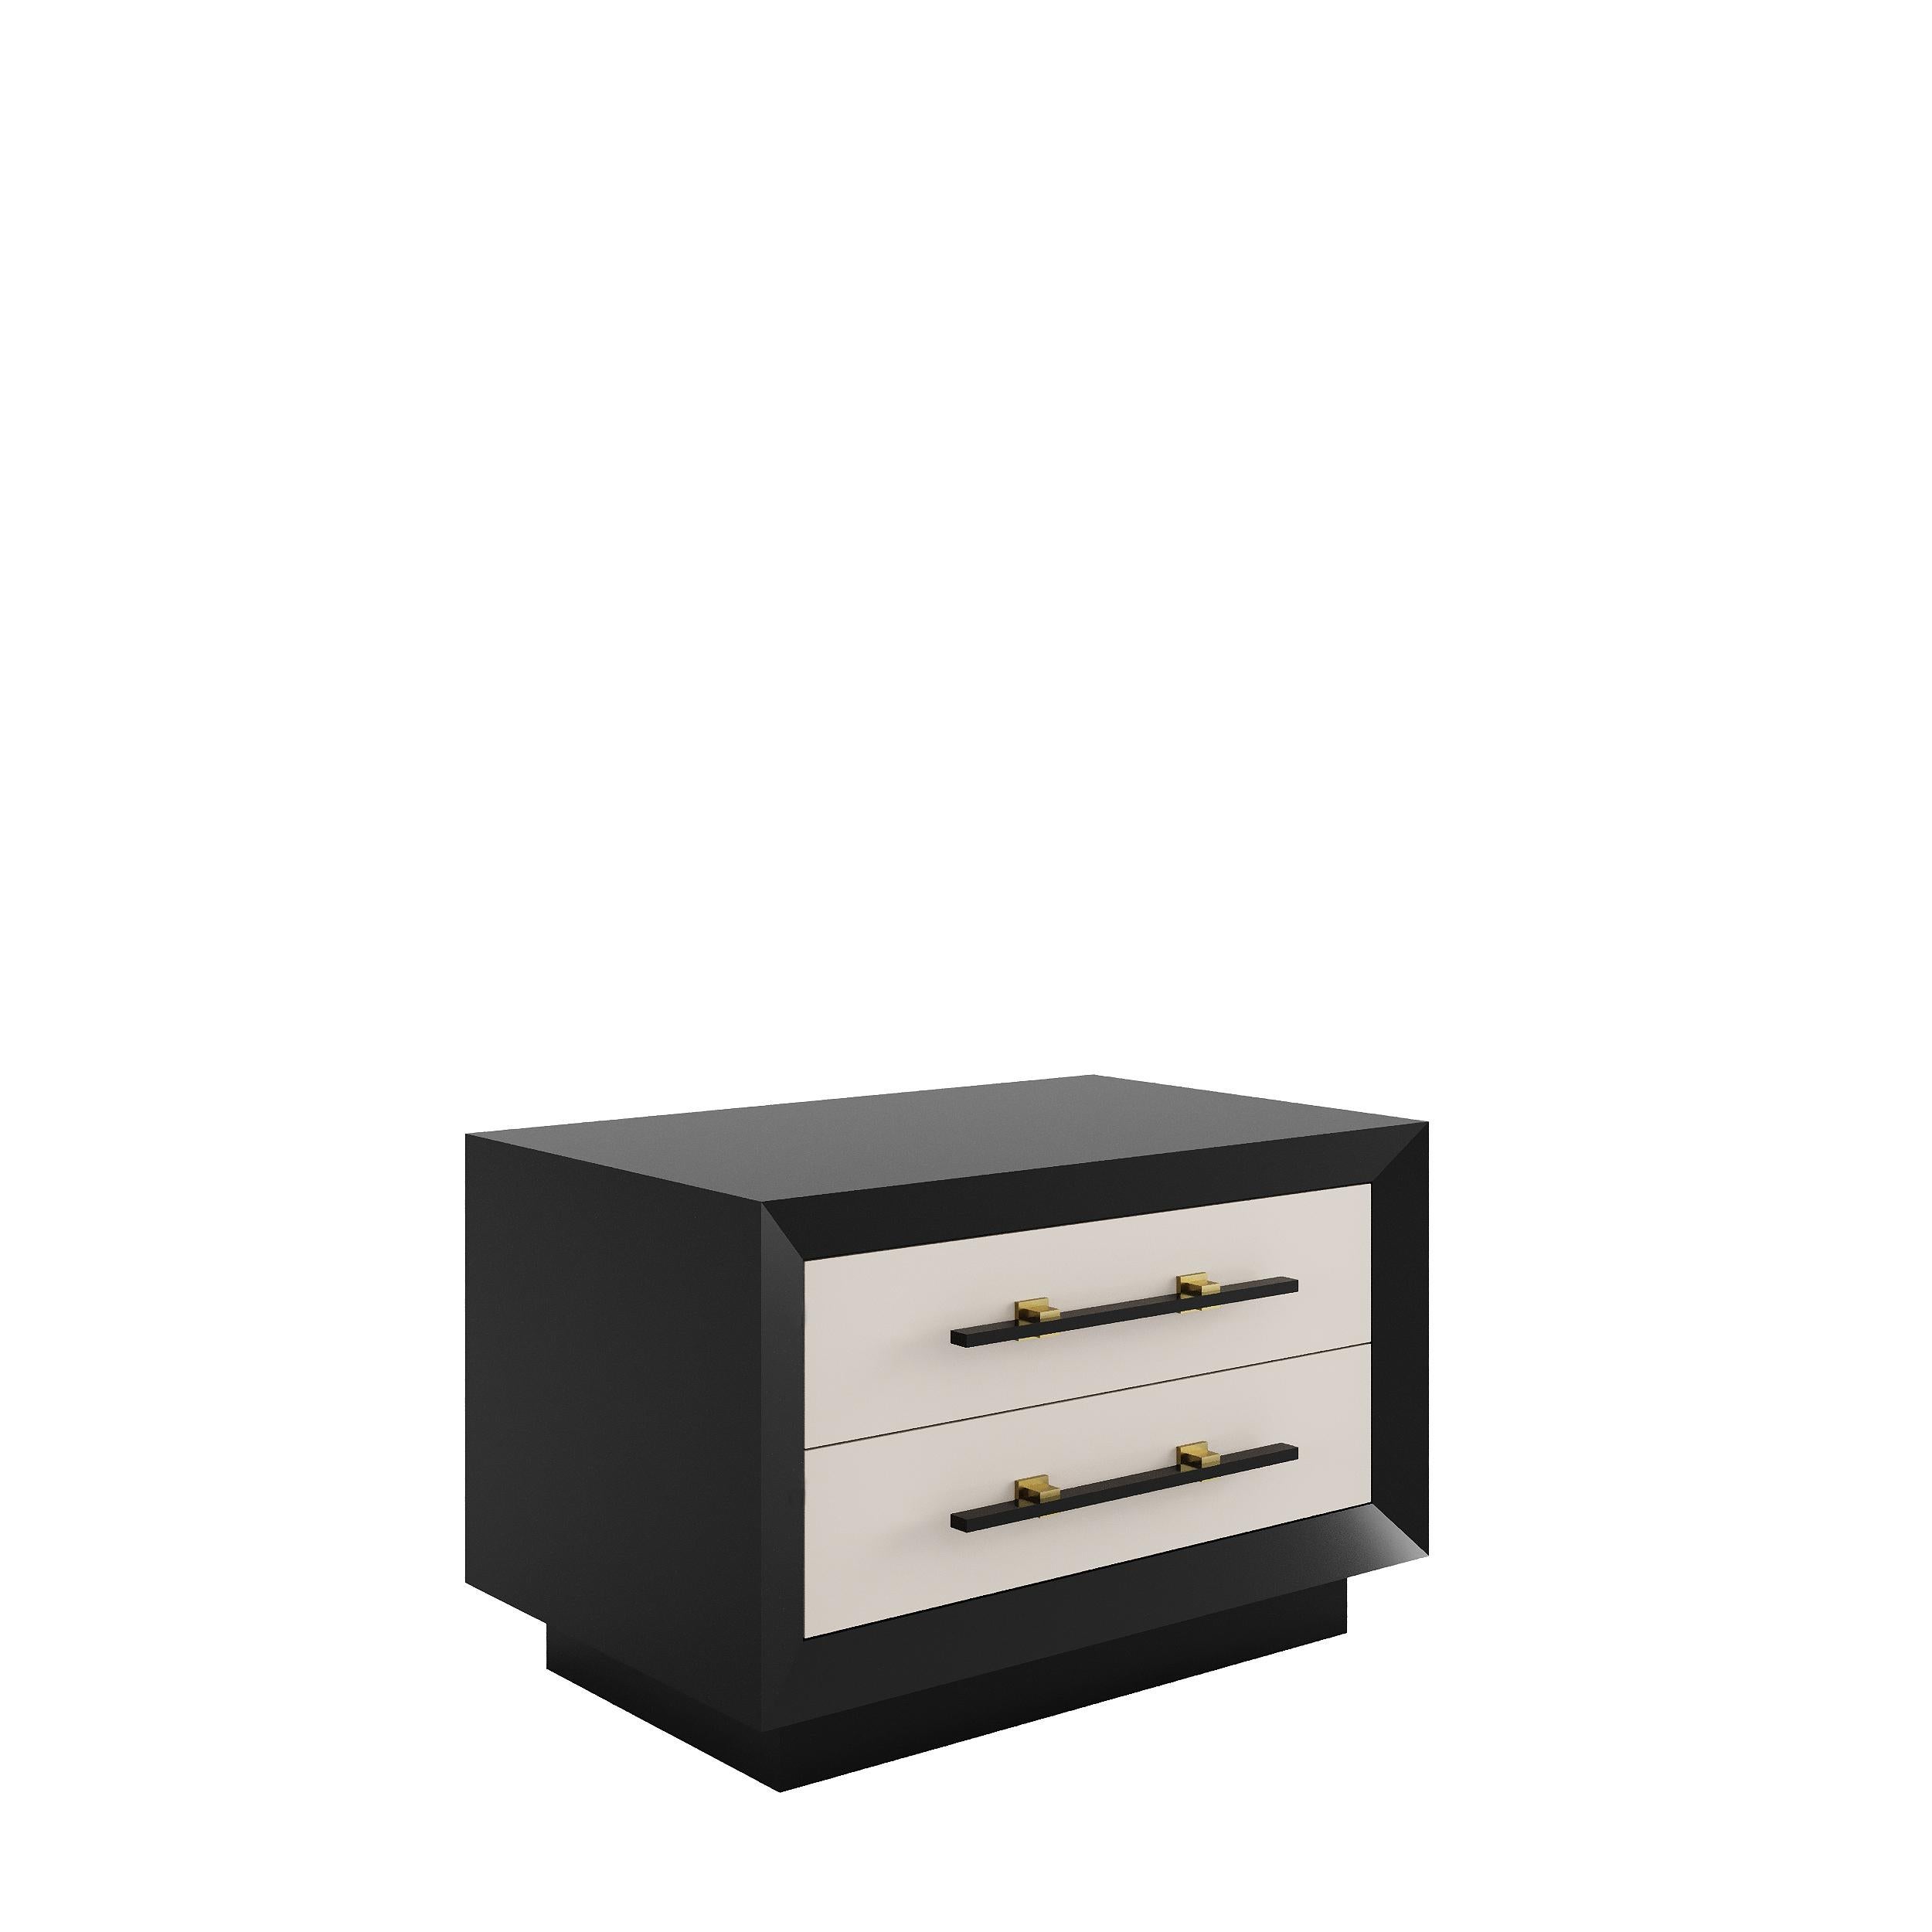 Wood MAGNA Nightstand - wooden base For Sale